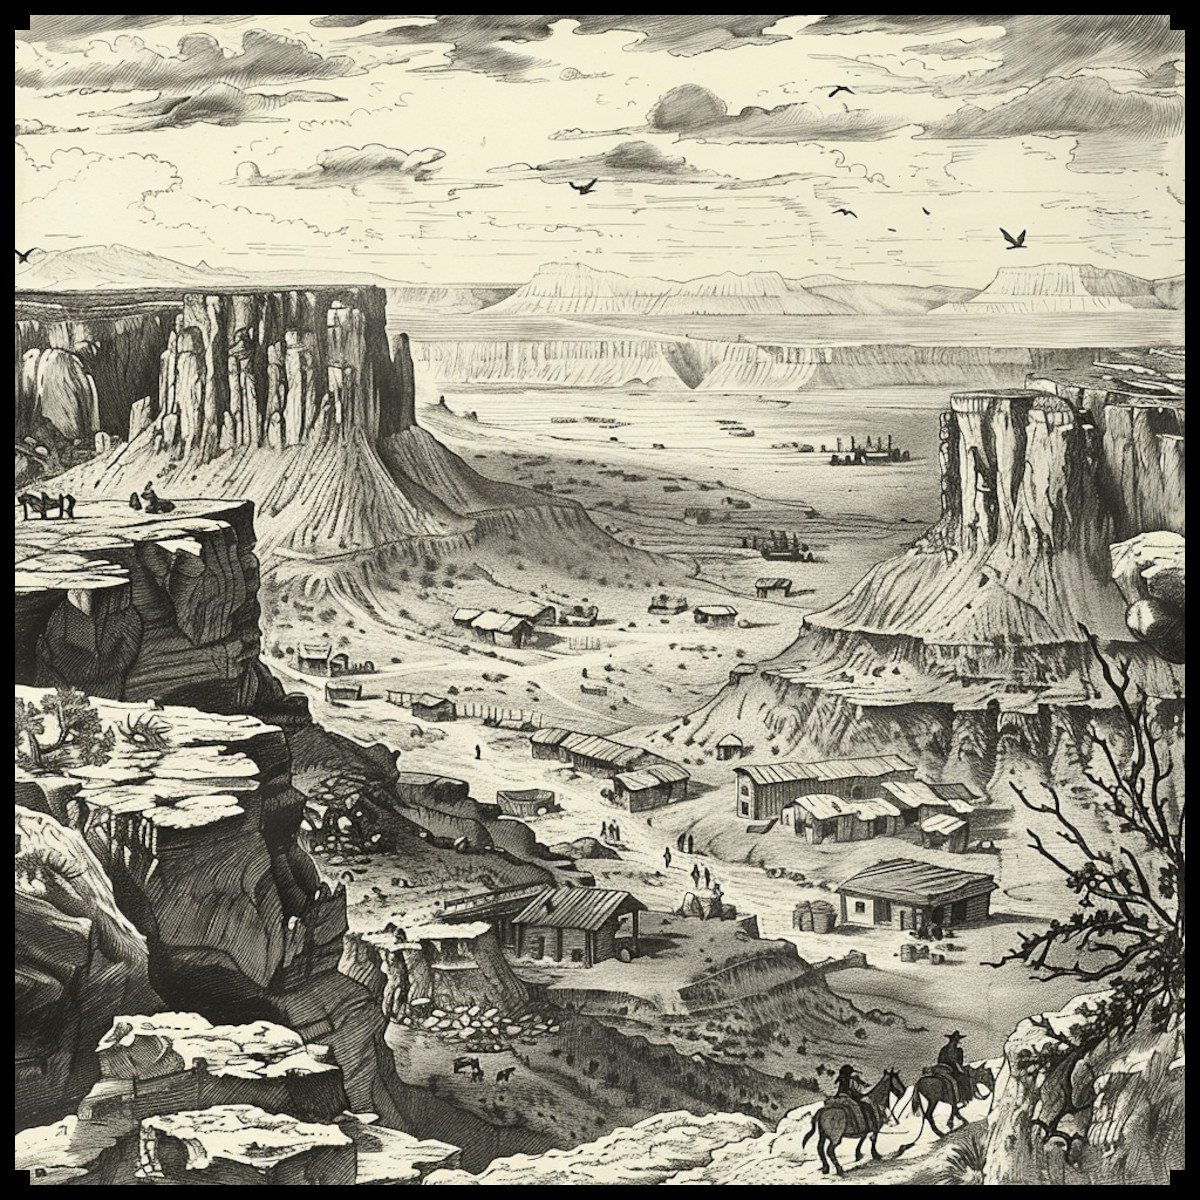 Wonderdraft assets, with etching illustration of wild west and old west, canyons, mesas, wild west towns